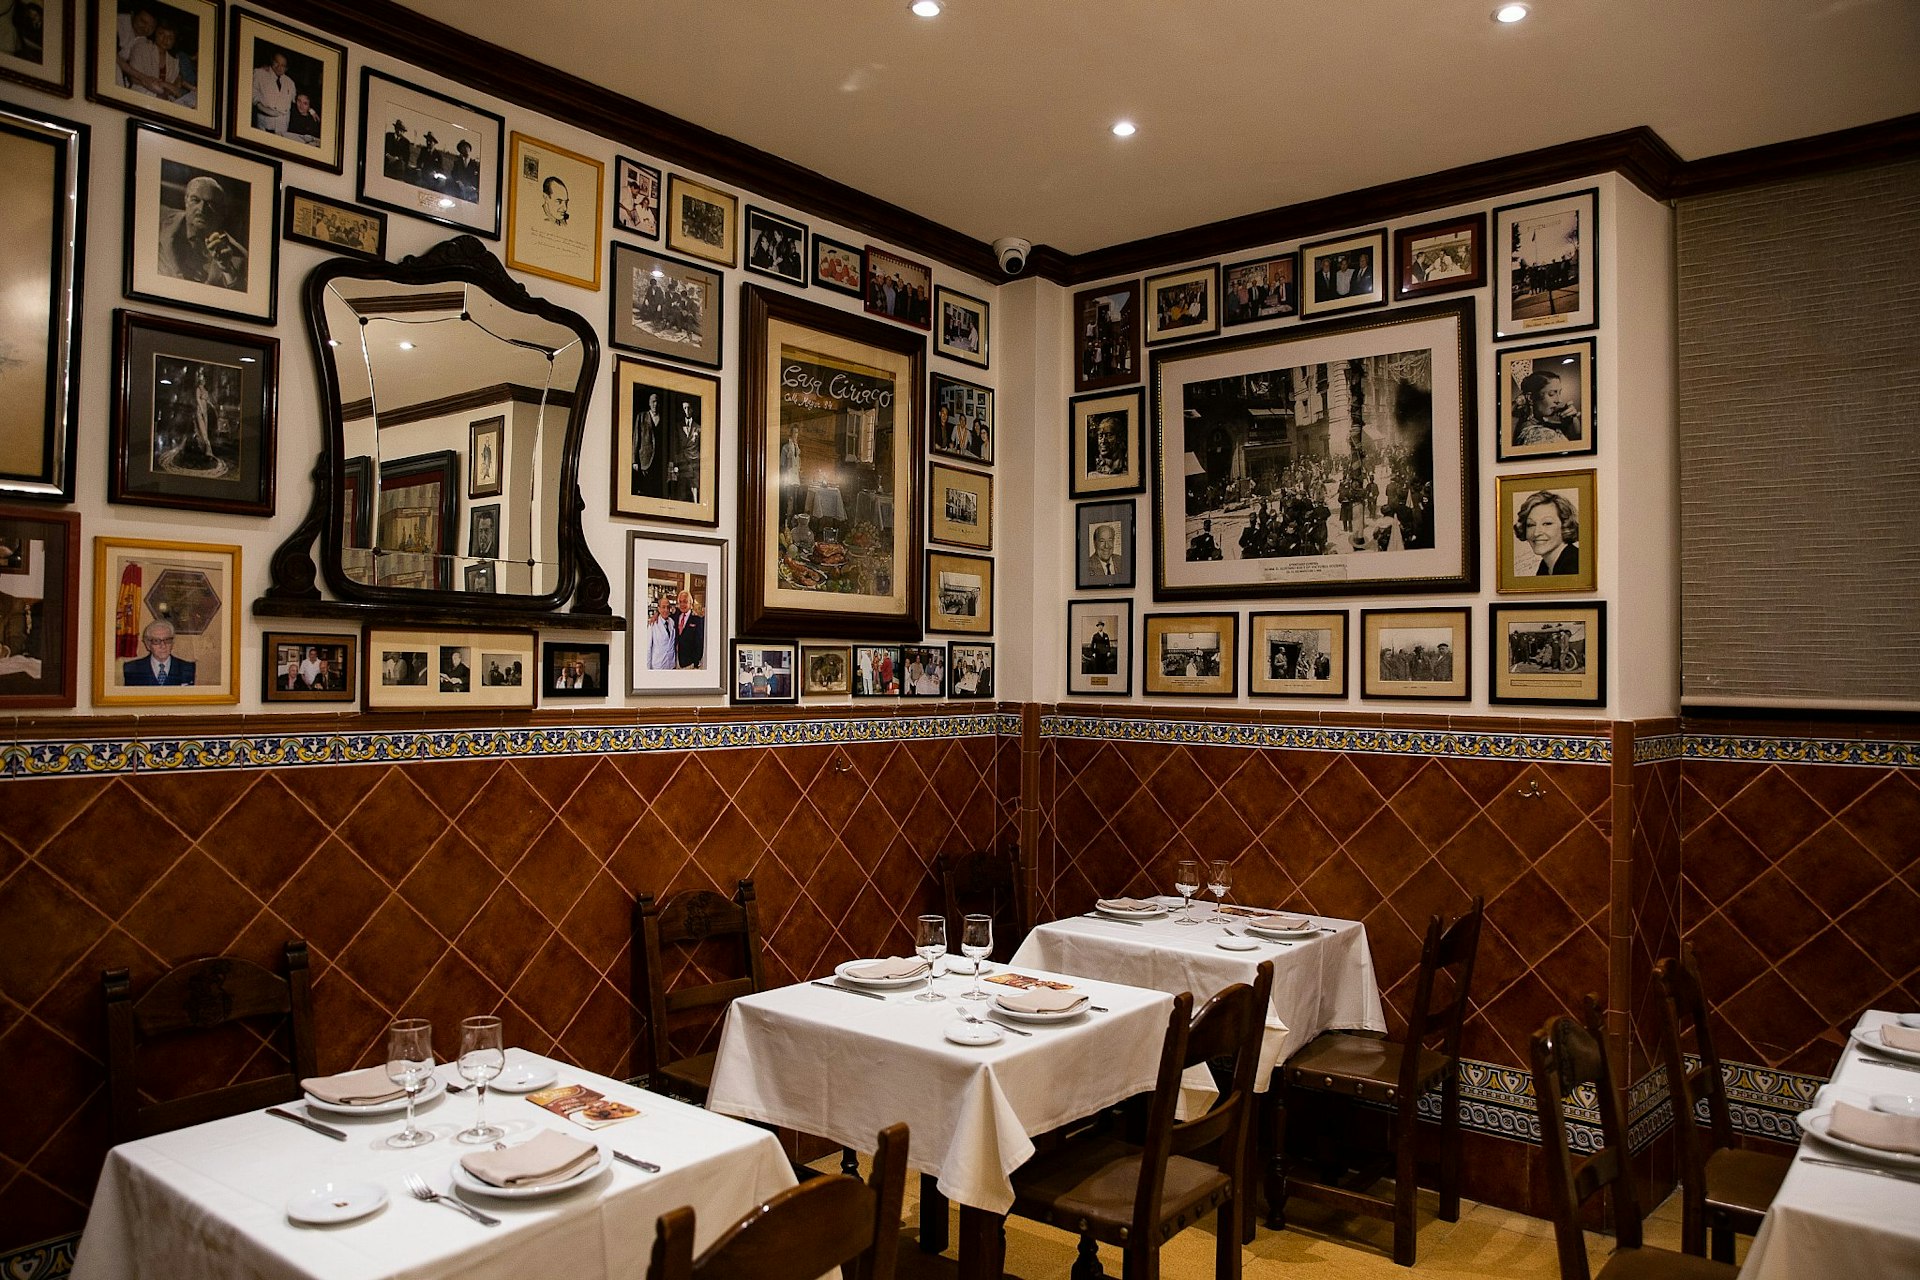 The interior of Casa Ciriaco in Madrid: many historic photos line the walls, and there are dark wood chairs and white tablecloths.